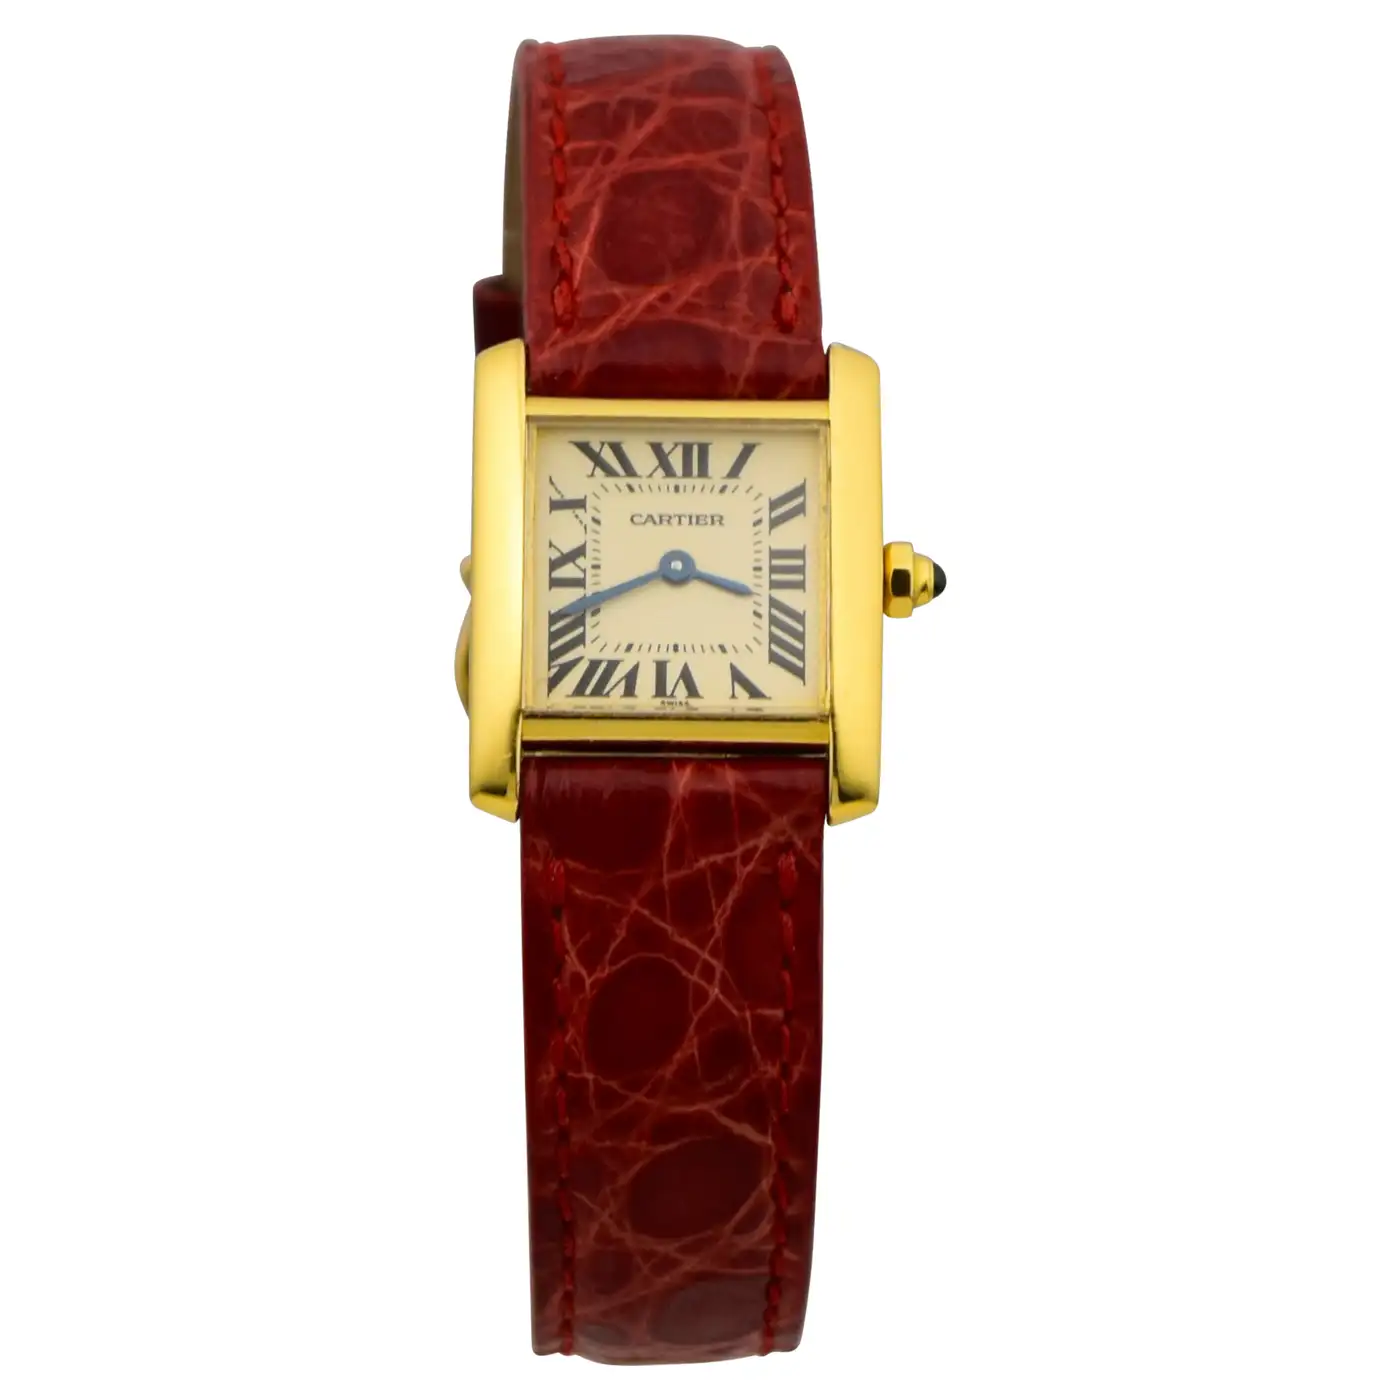 Cartier-Tank-Montres-Francaise-in-18k-Yellow-Gold-Watch-5.webp